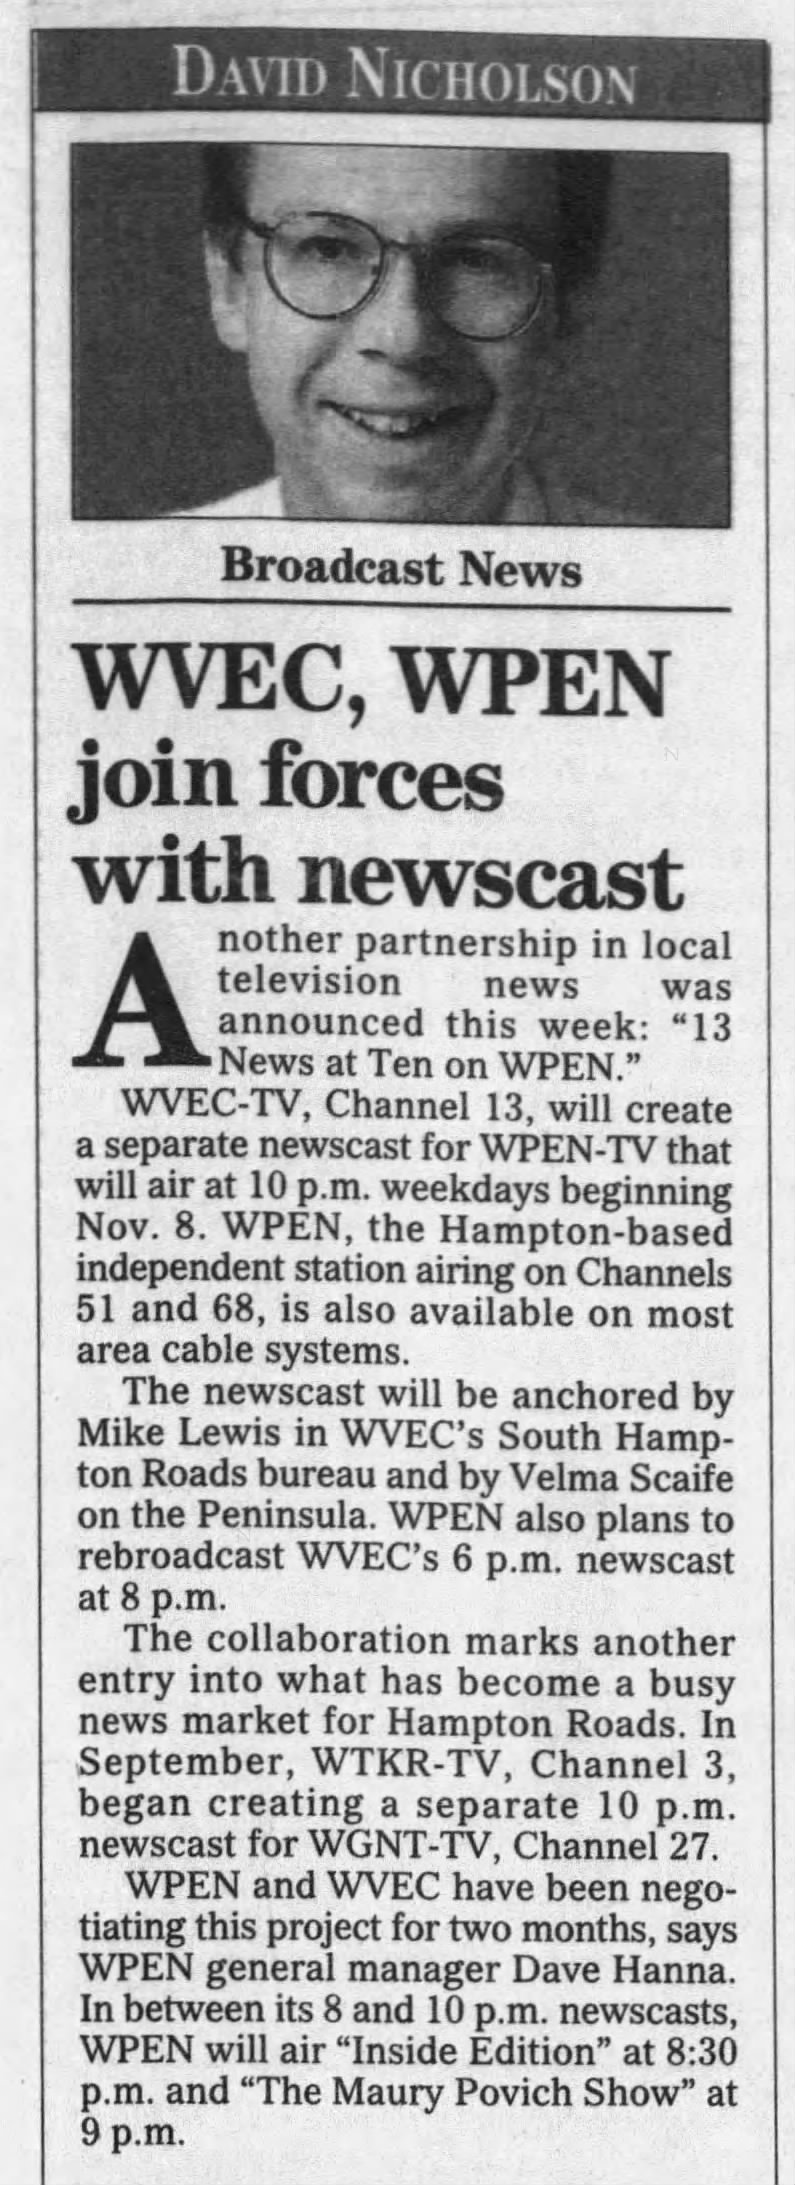 WVEC, WPEN join forces with newscast